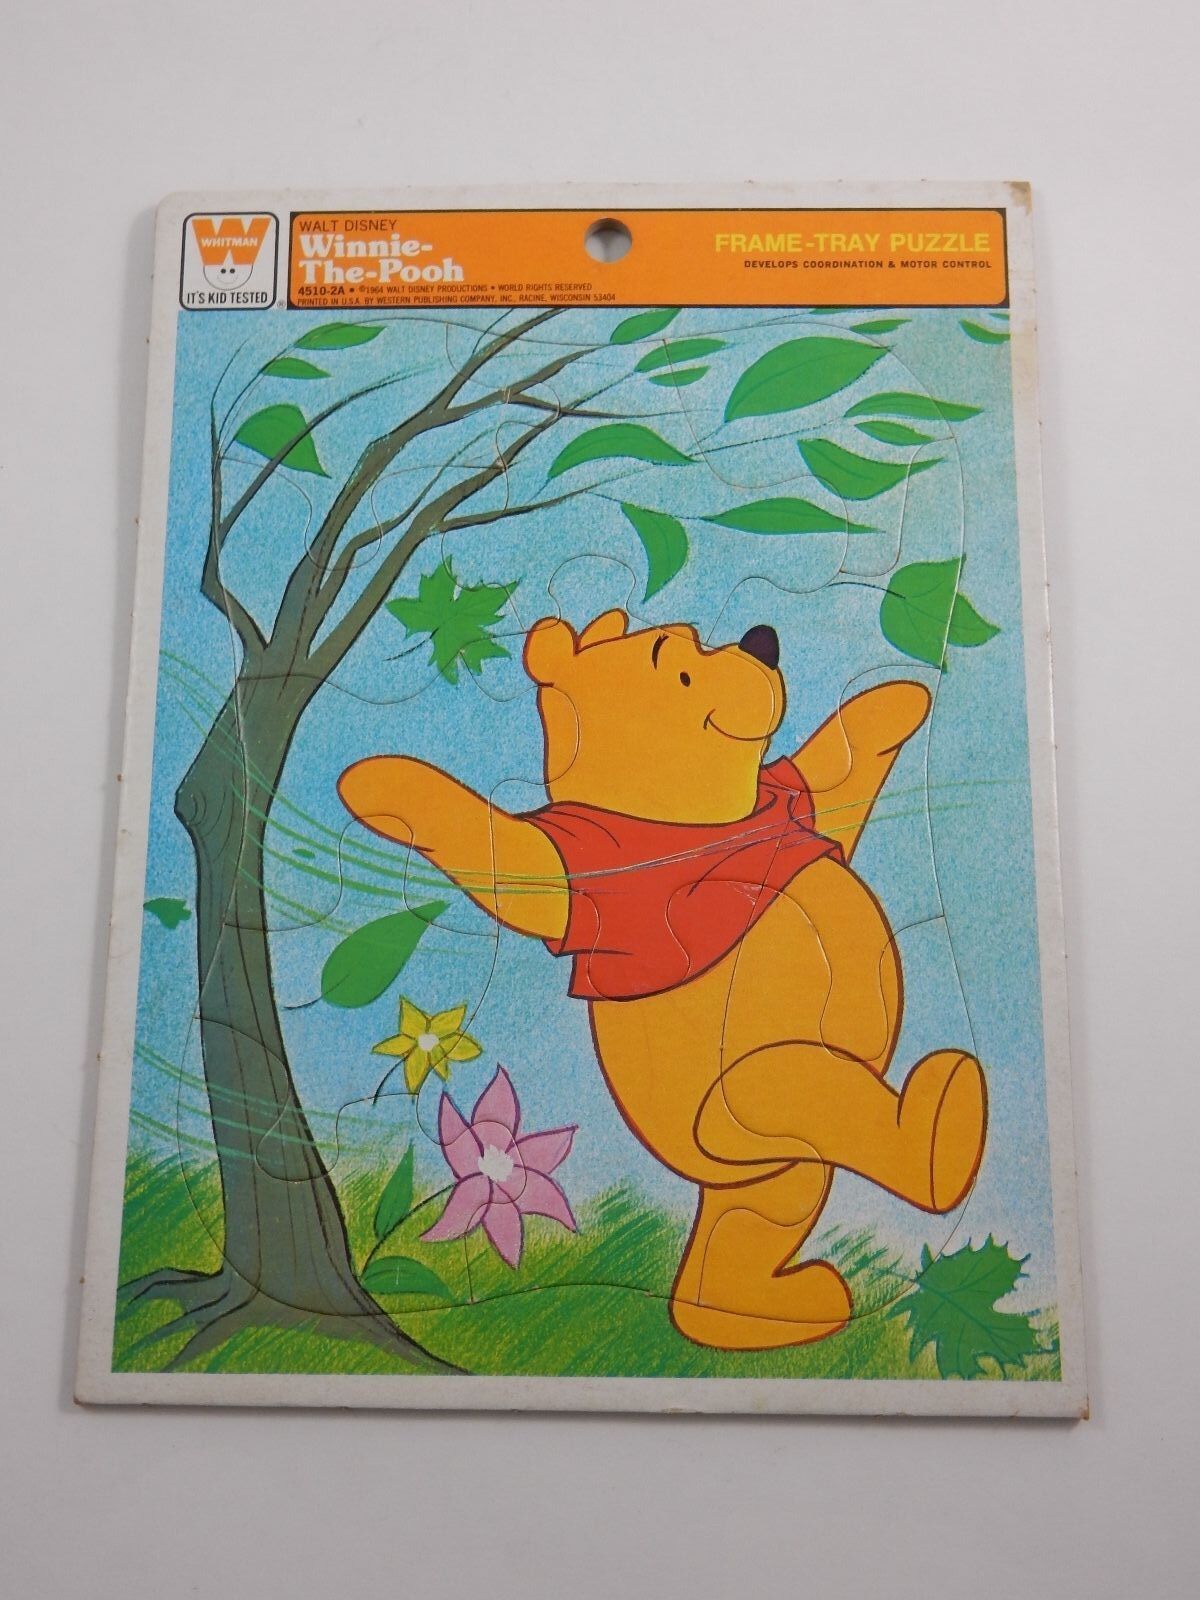 Primary image for Whitman 1964 Walt Disney Winnie the Pooh Frame Tray Puzzle #4510-2A